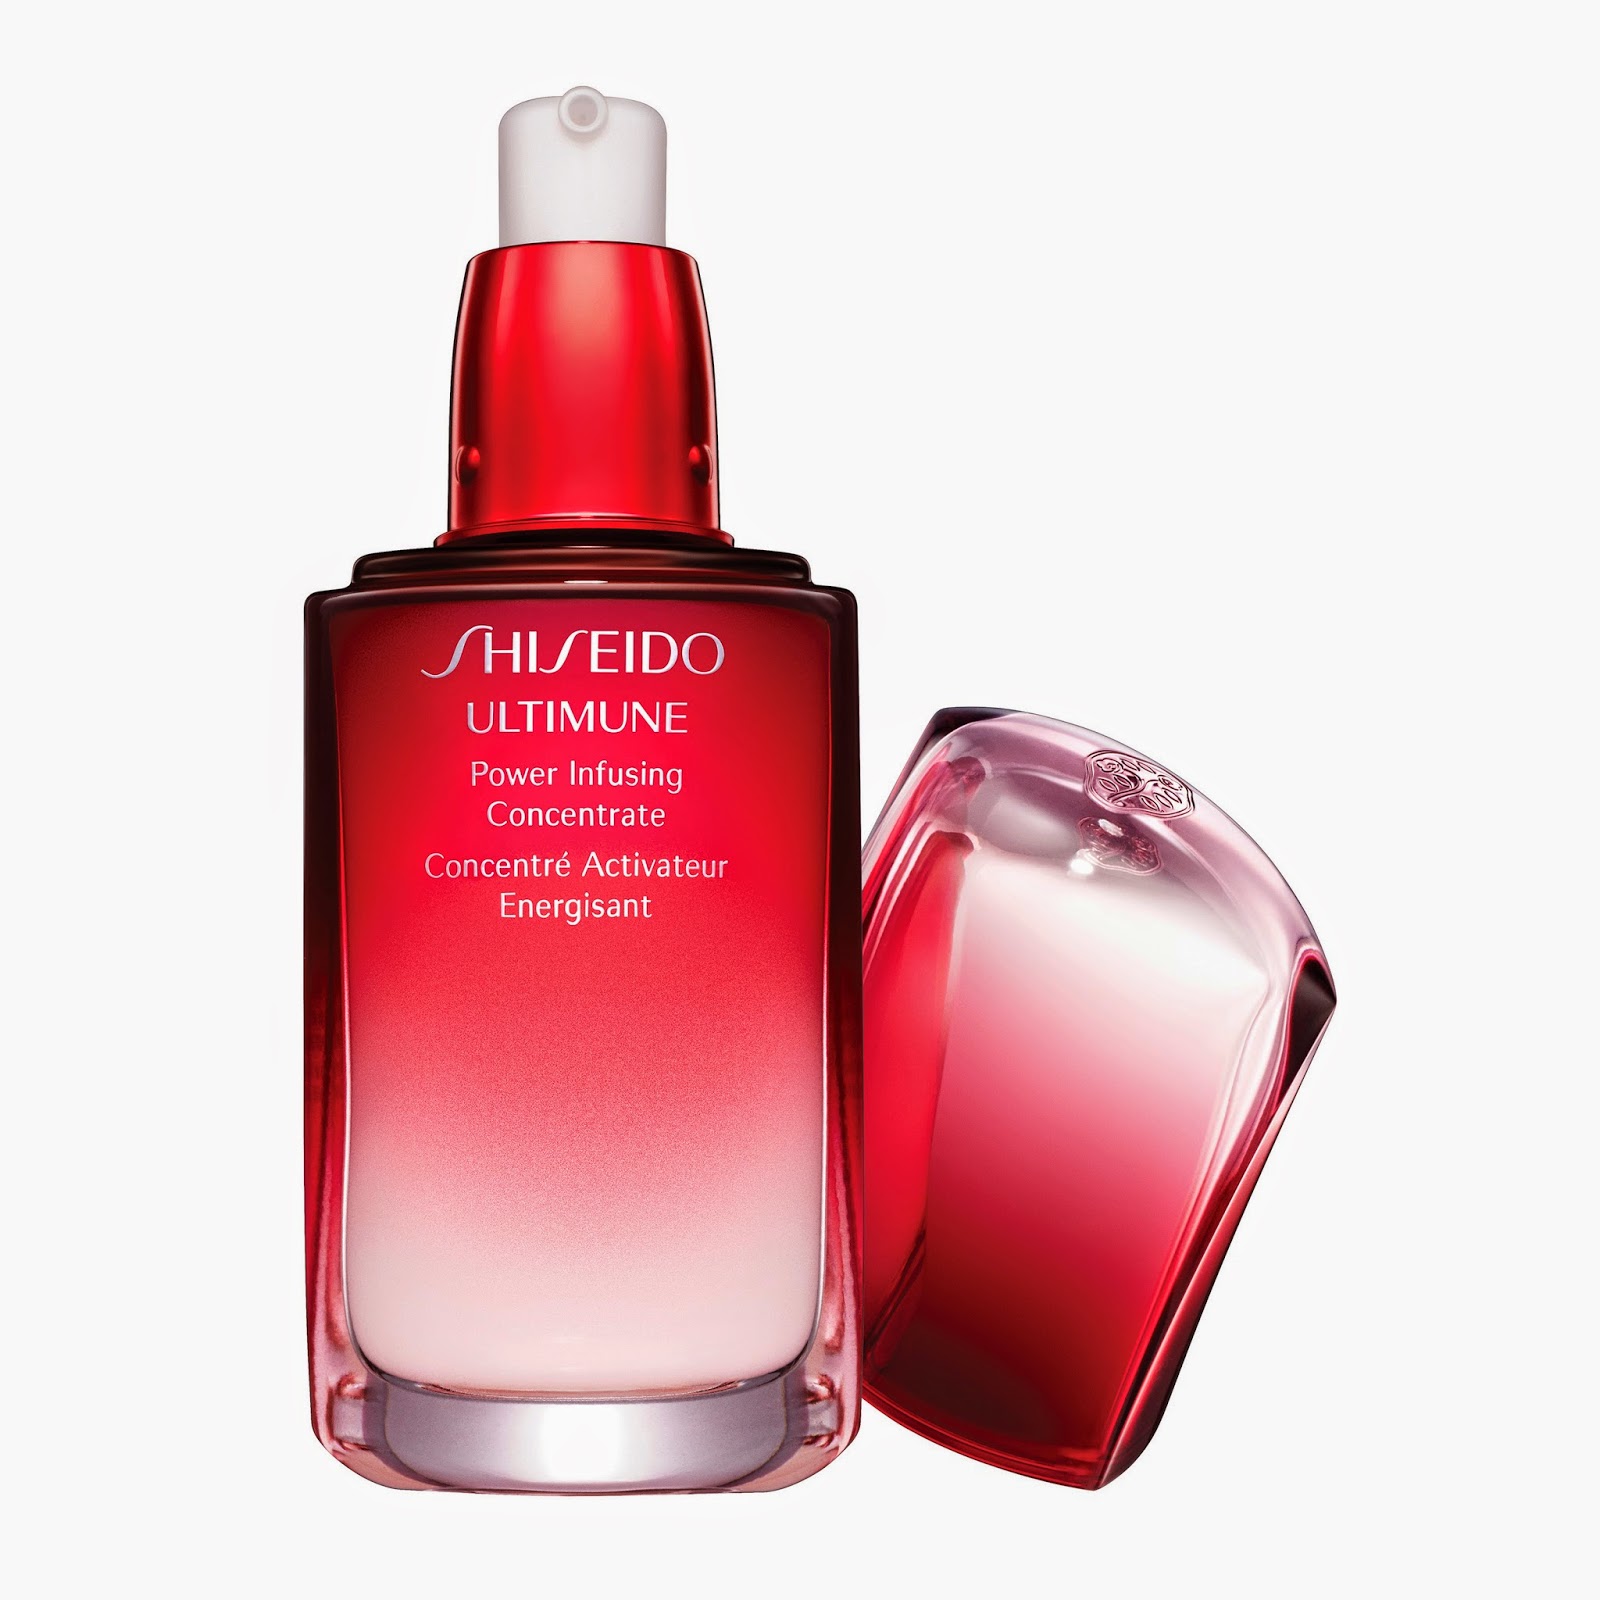 Shiseido concentrate